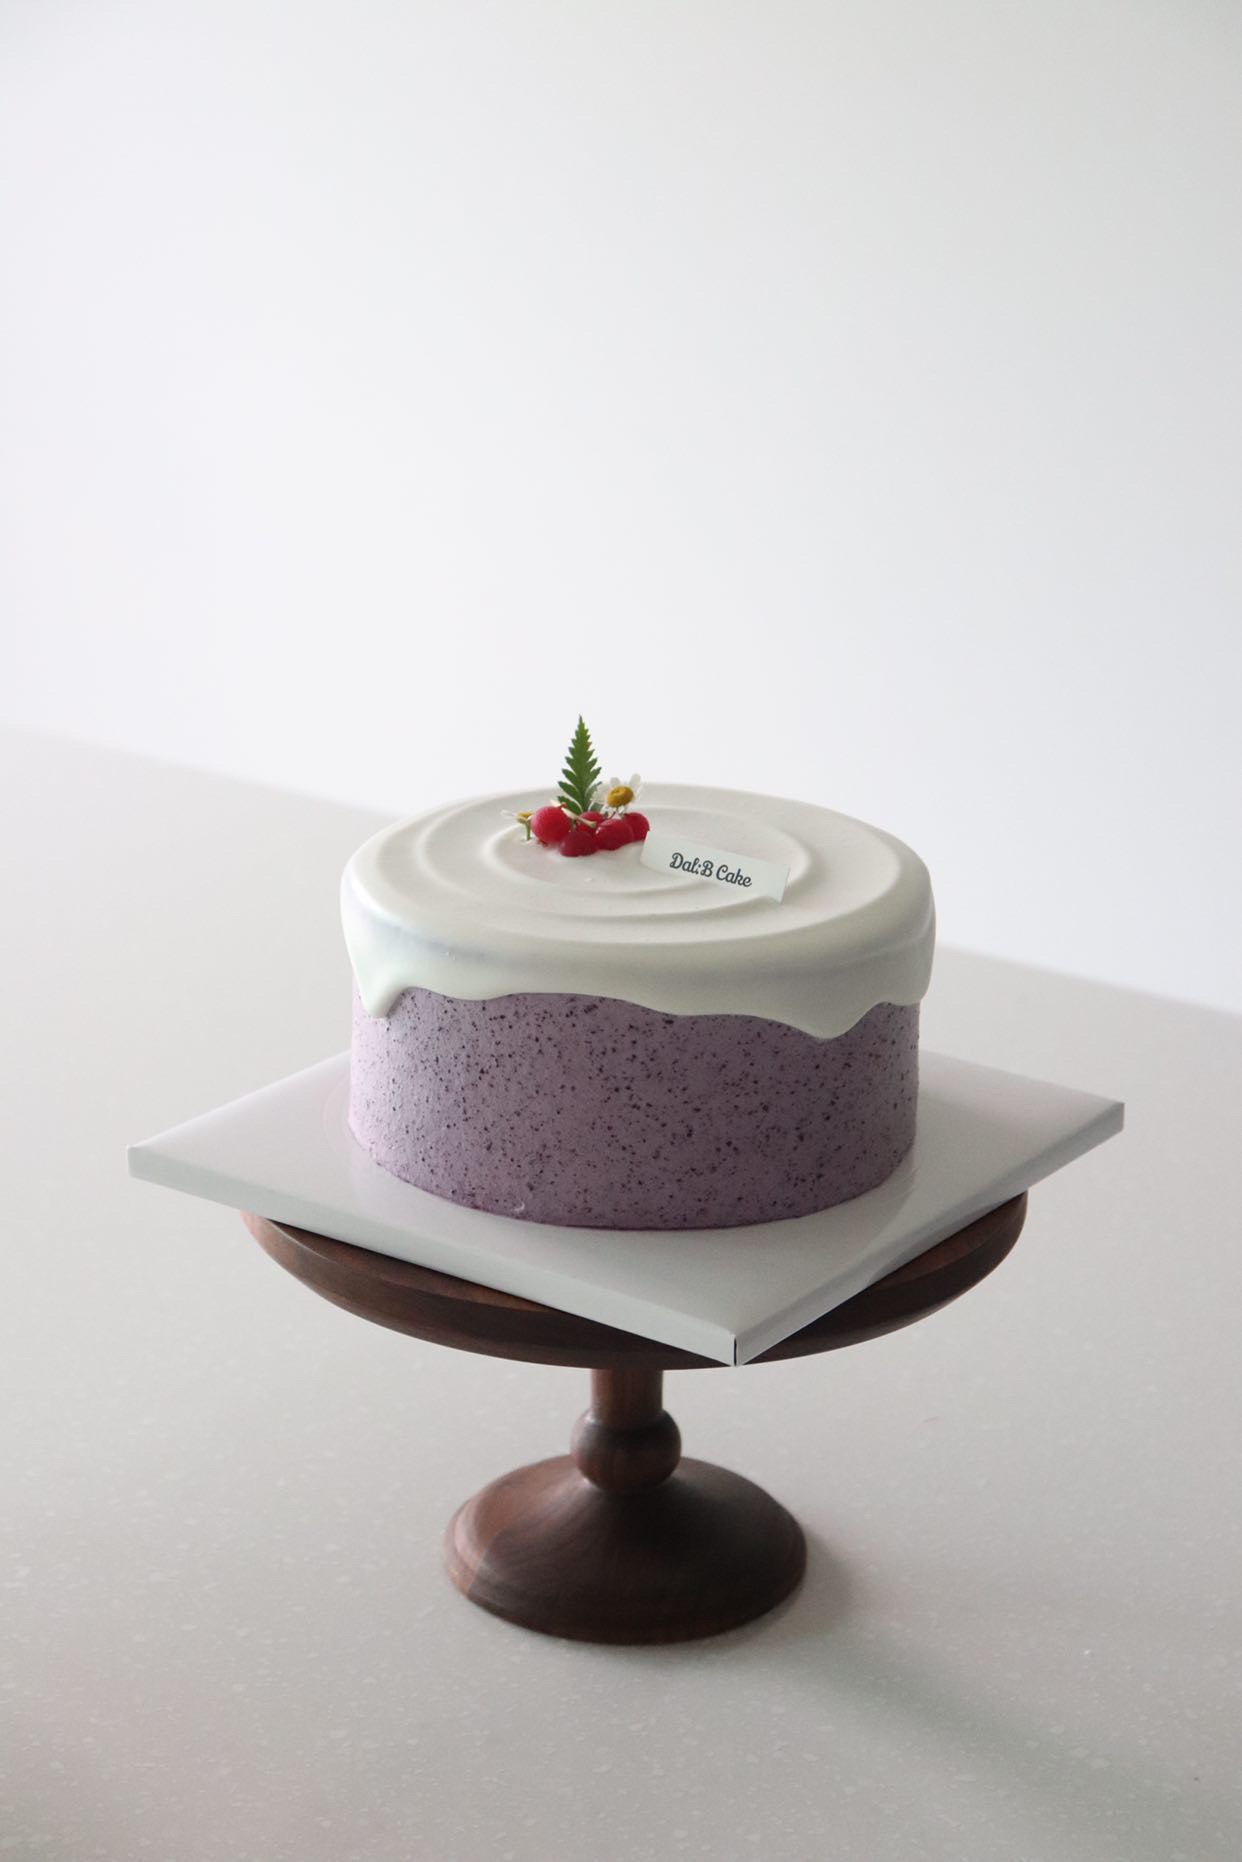 Online Class : Dal B Cake one day class - Blueberry Cake / Lime + Cheese Cake / Cube Pound Cake 3 Flavors